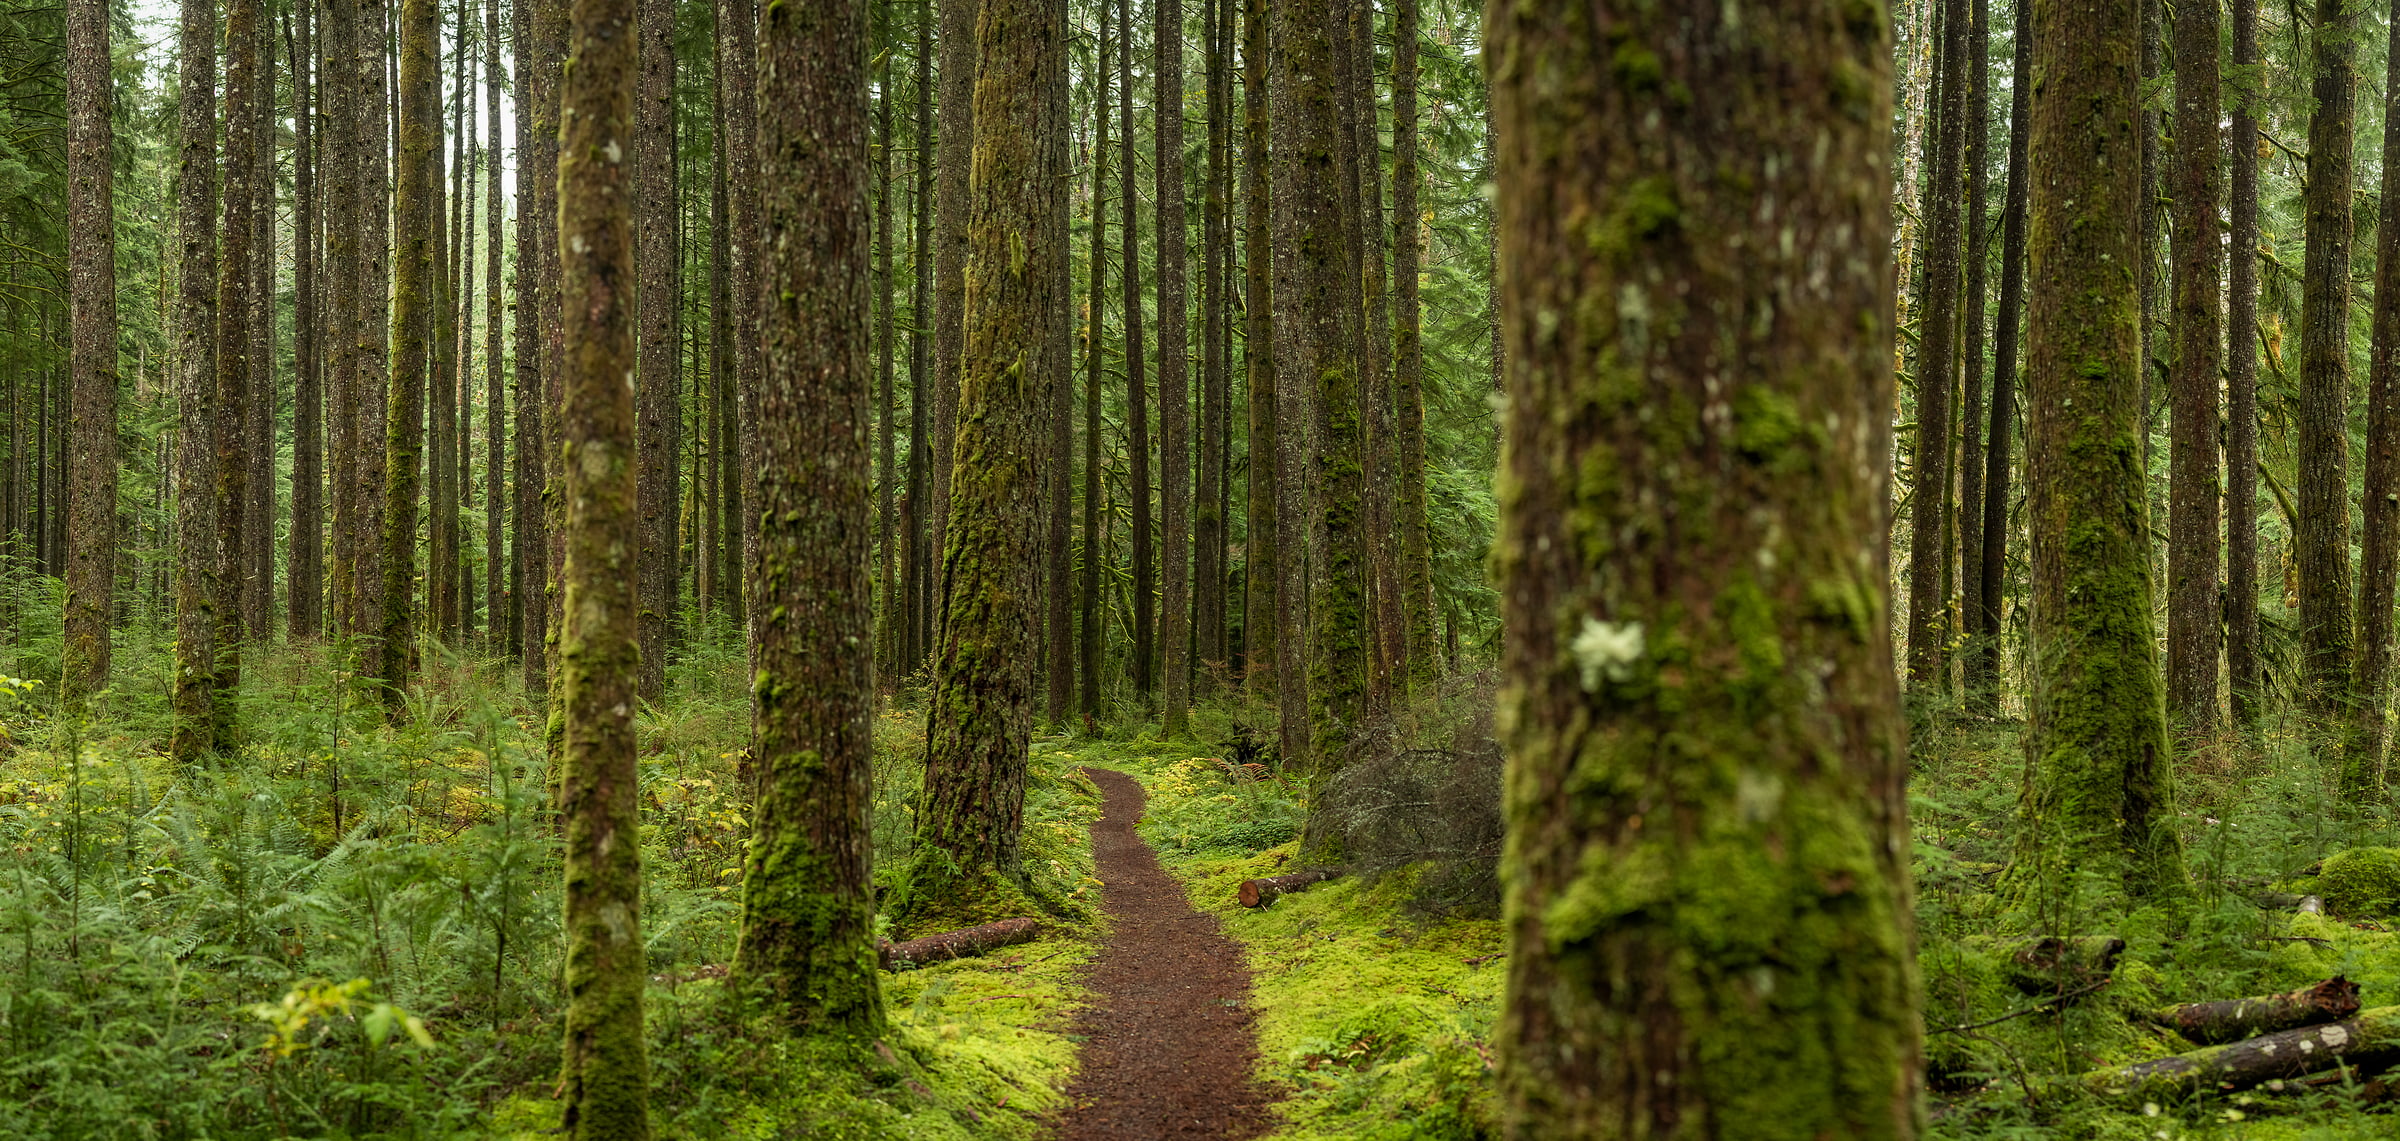 217 megapixels! A very high resolution, large-format VAST photo print of a pathway in a forest; nature photograph created by Scott Rinckenberger in CCC Trail, Middle Fork Trailhead, Middle Fork Snoqualmie River, Washington.